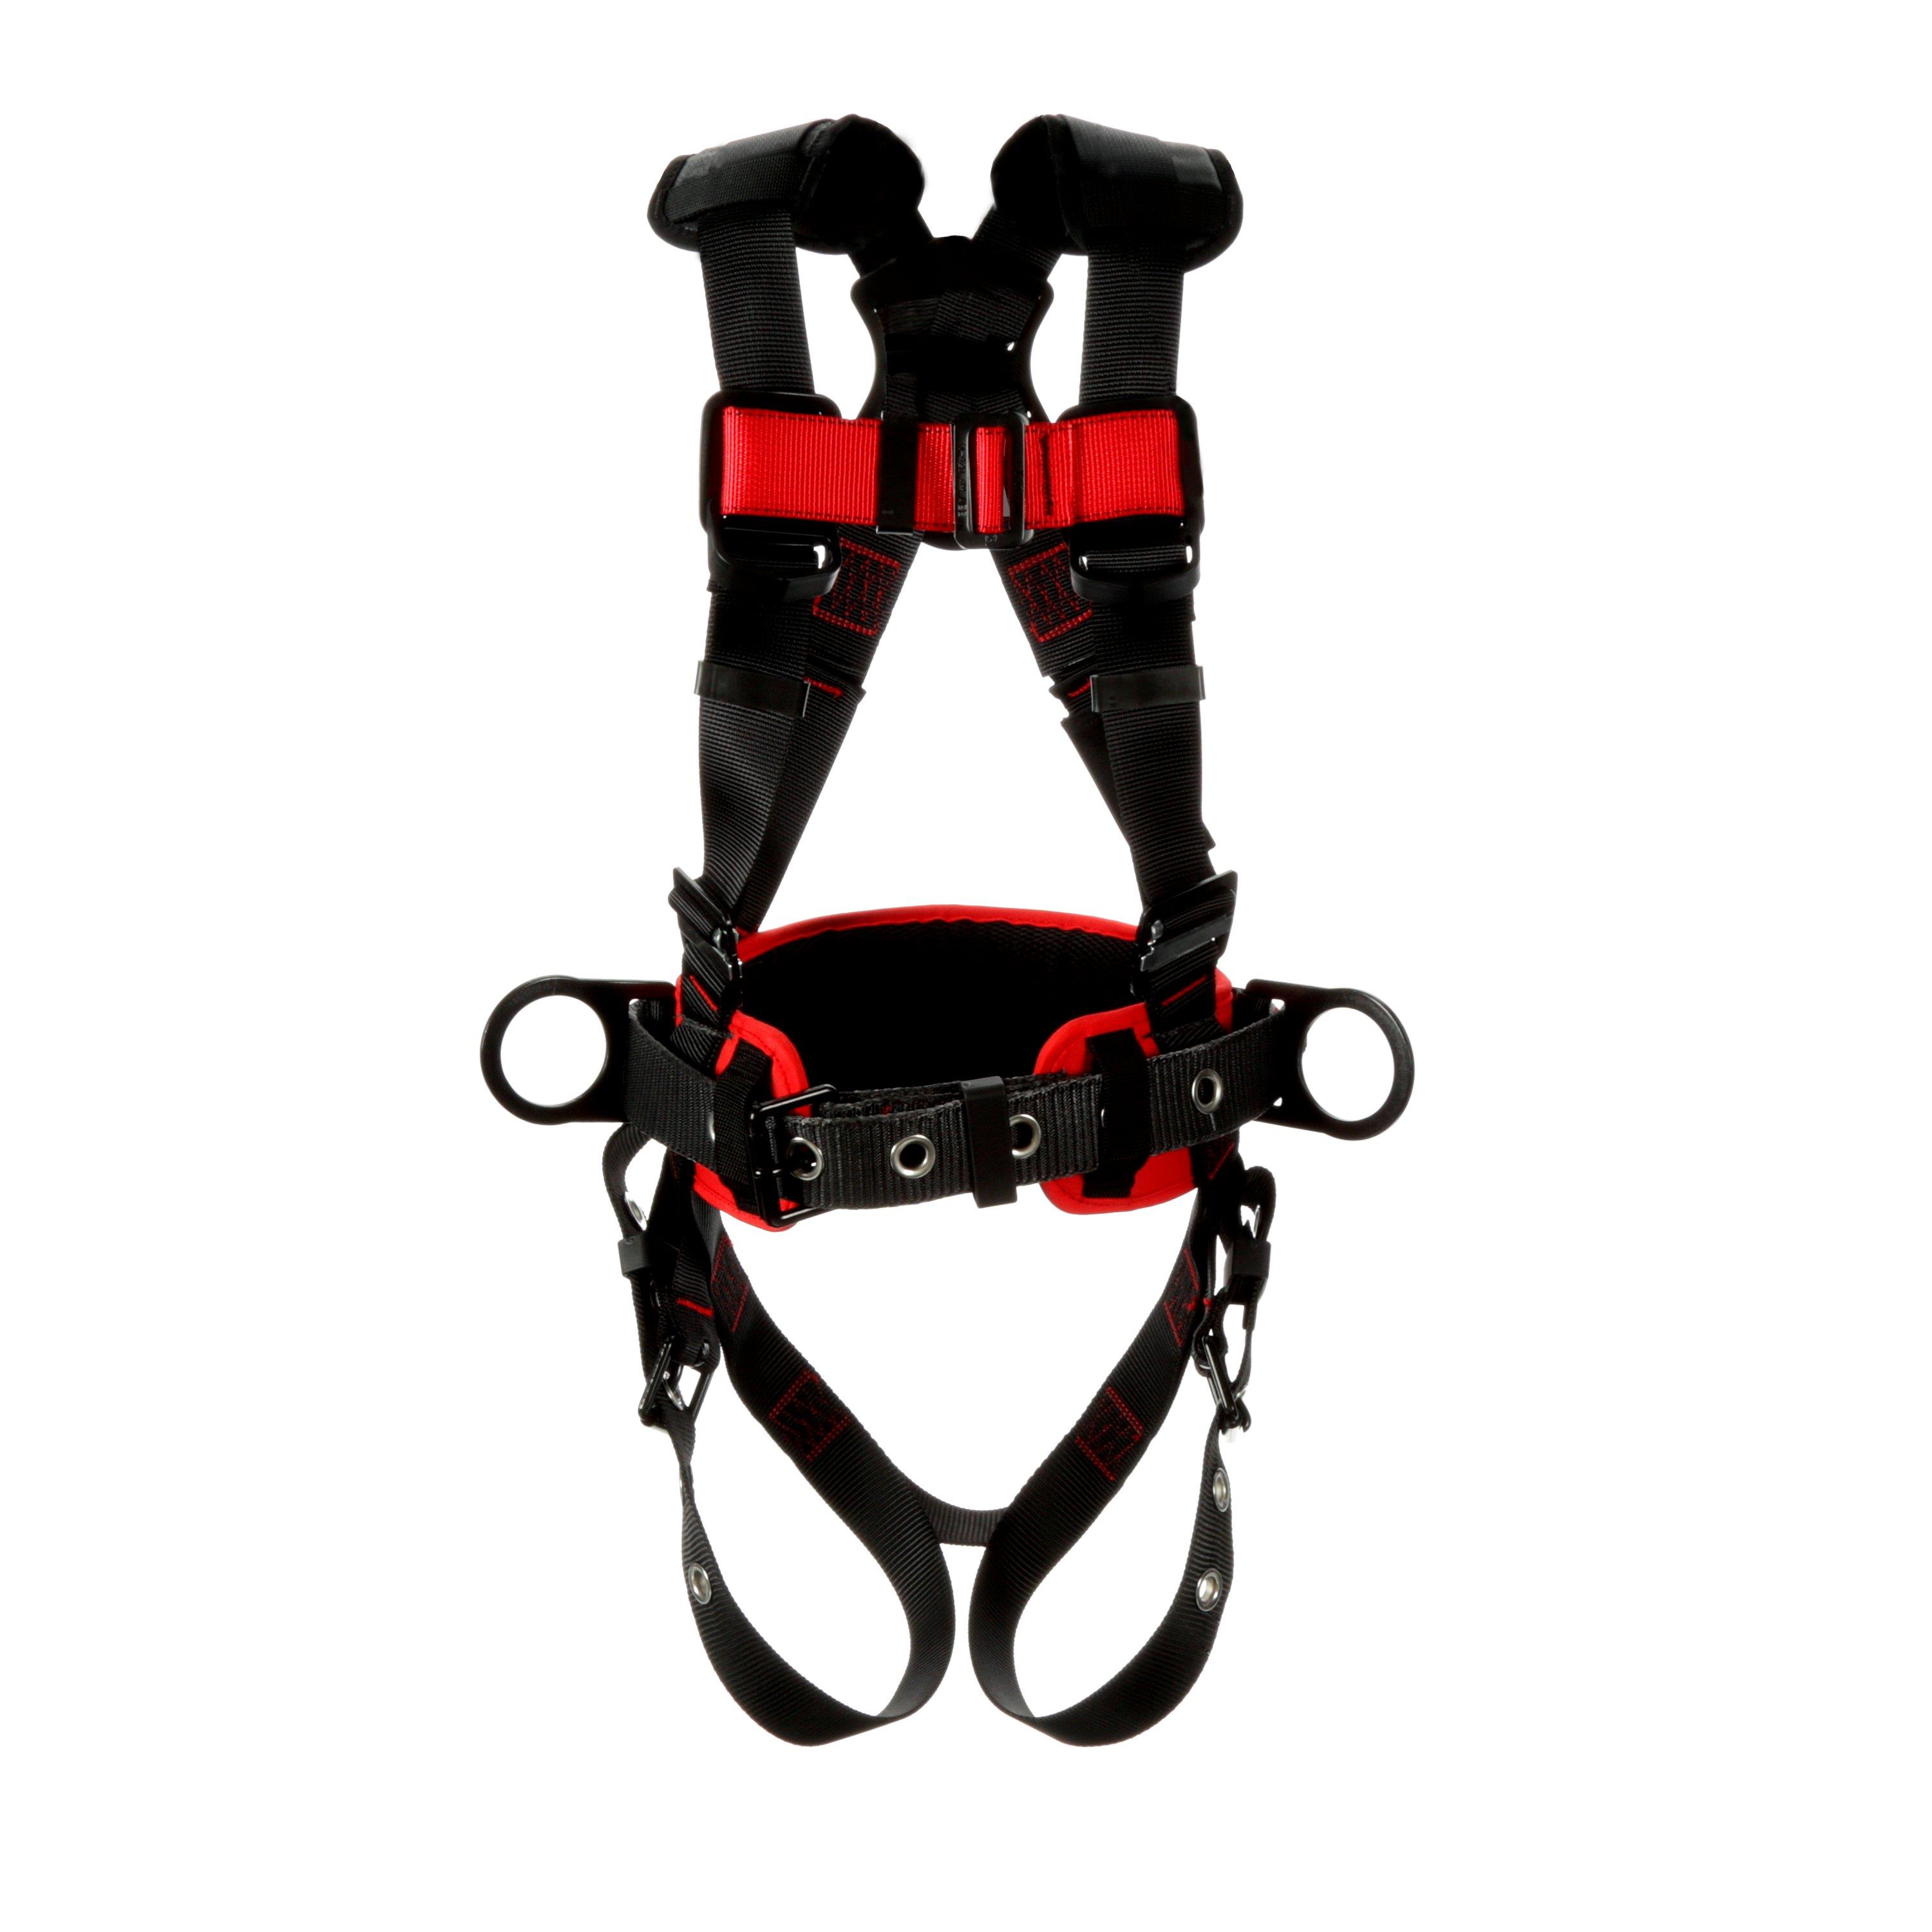 Protecta Pro Construction Harness TB 3Ds